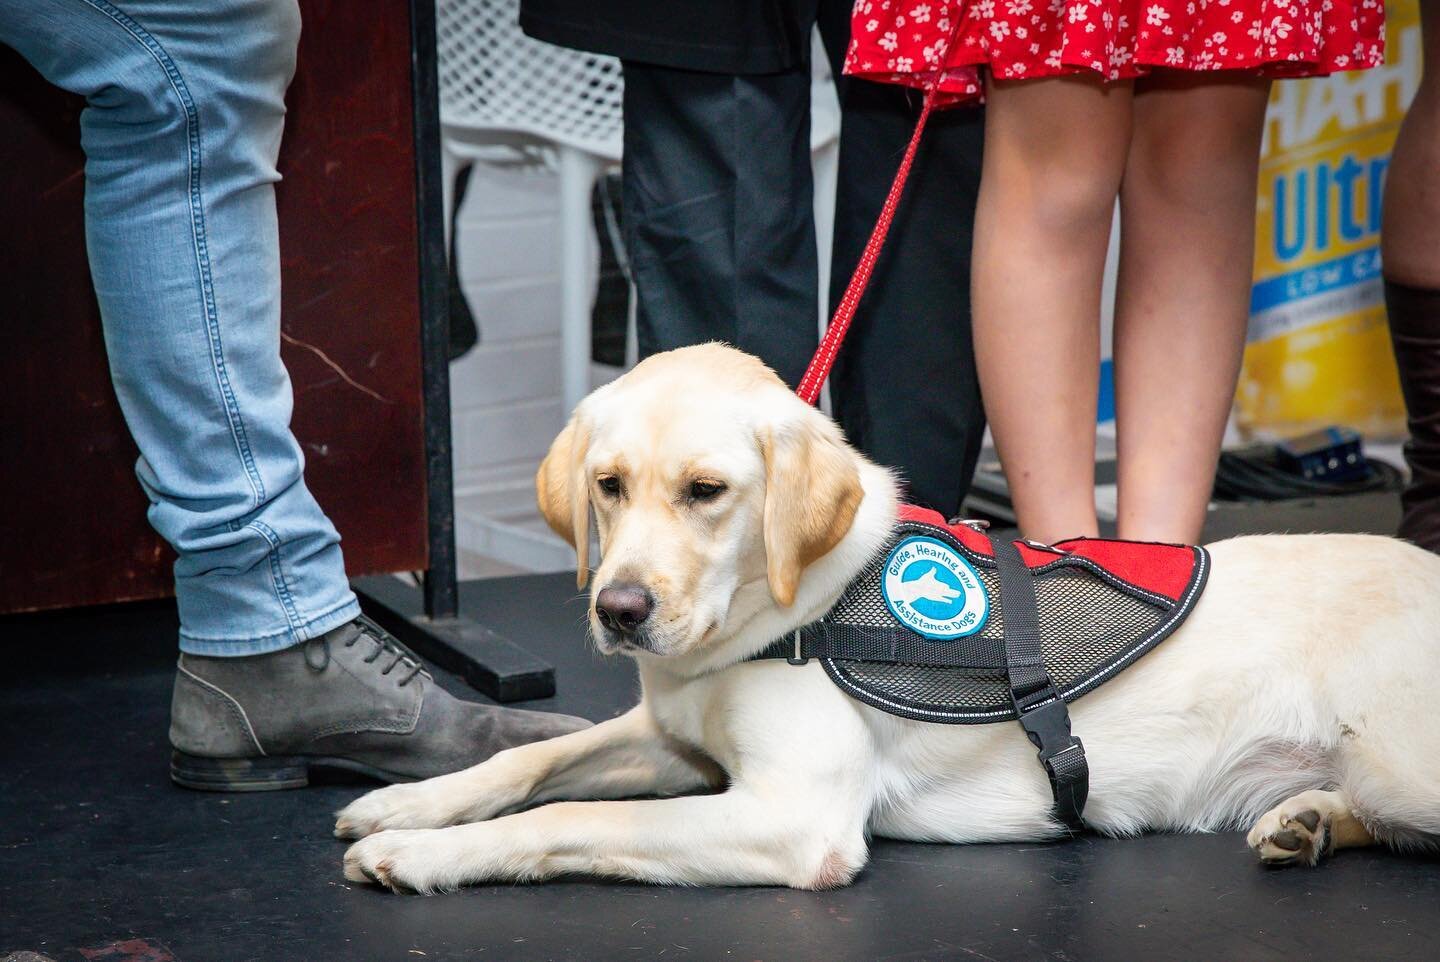 Brisbane&rsquo;s iconic The Paddo again hosted the Annual Smart Pups Assistance Dogs Corporate Charity Lunch Event 2023. With Aussie Greats such as Jon Stevens, Danny Green and Dawn Fraser all doing their part, this year&rsquo;s event was yet another